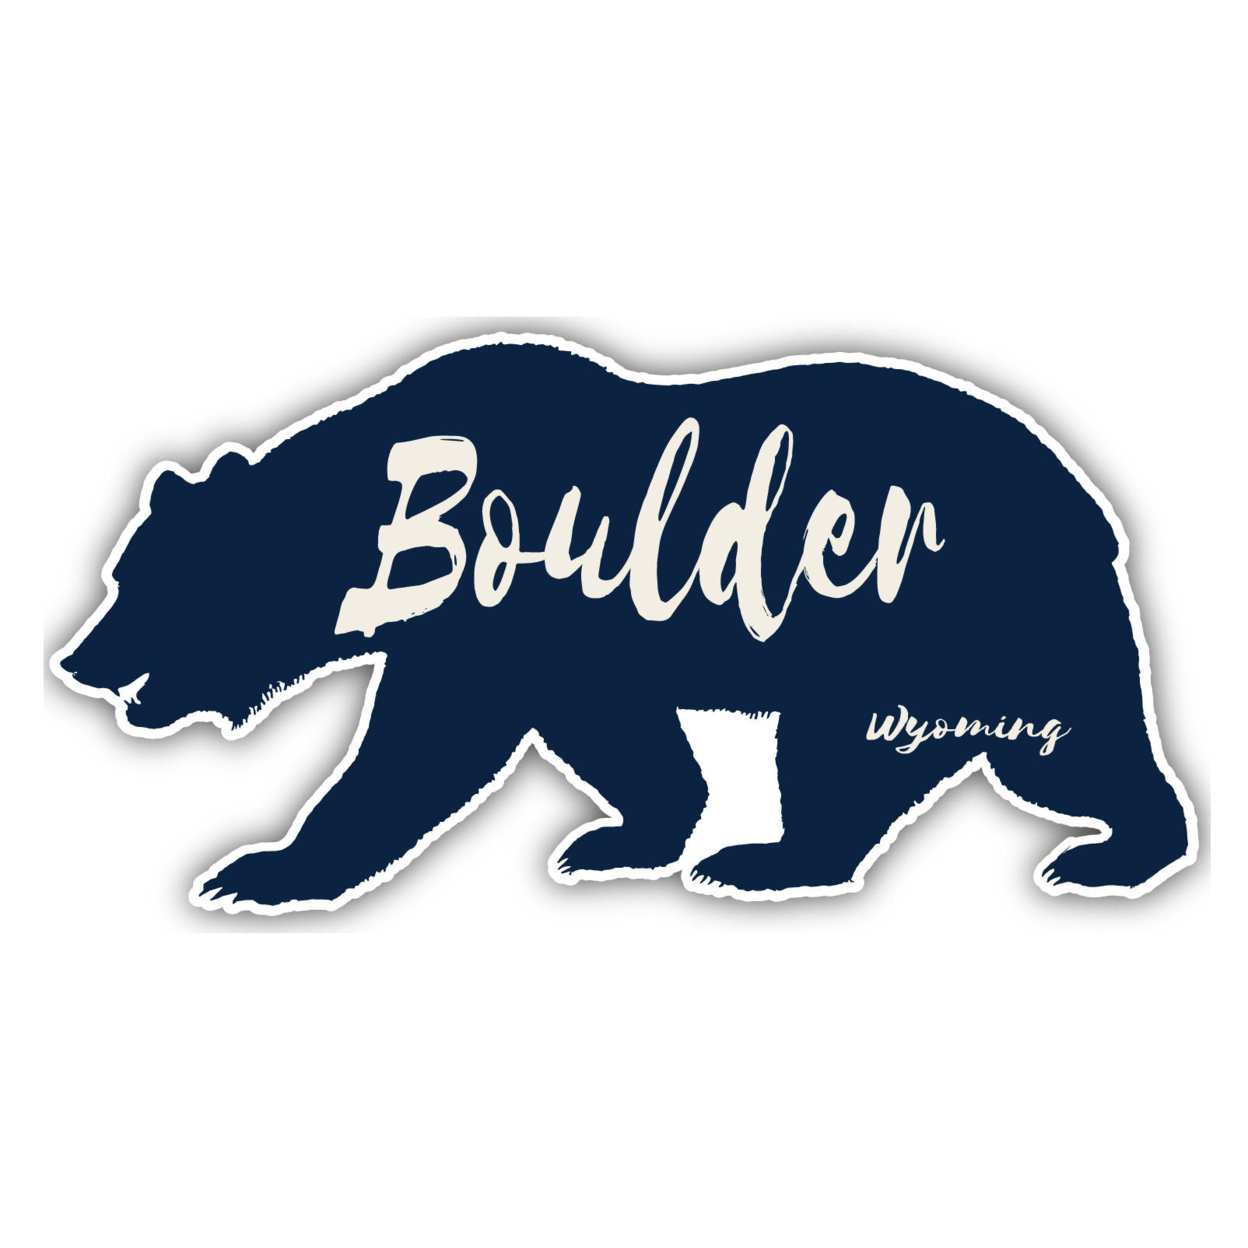 Boulder Wyoming Souvenir Decorative Stickers (Choose Theme And Size) - 4-Pack, 2-Inch, Bear